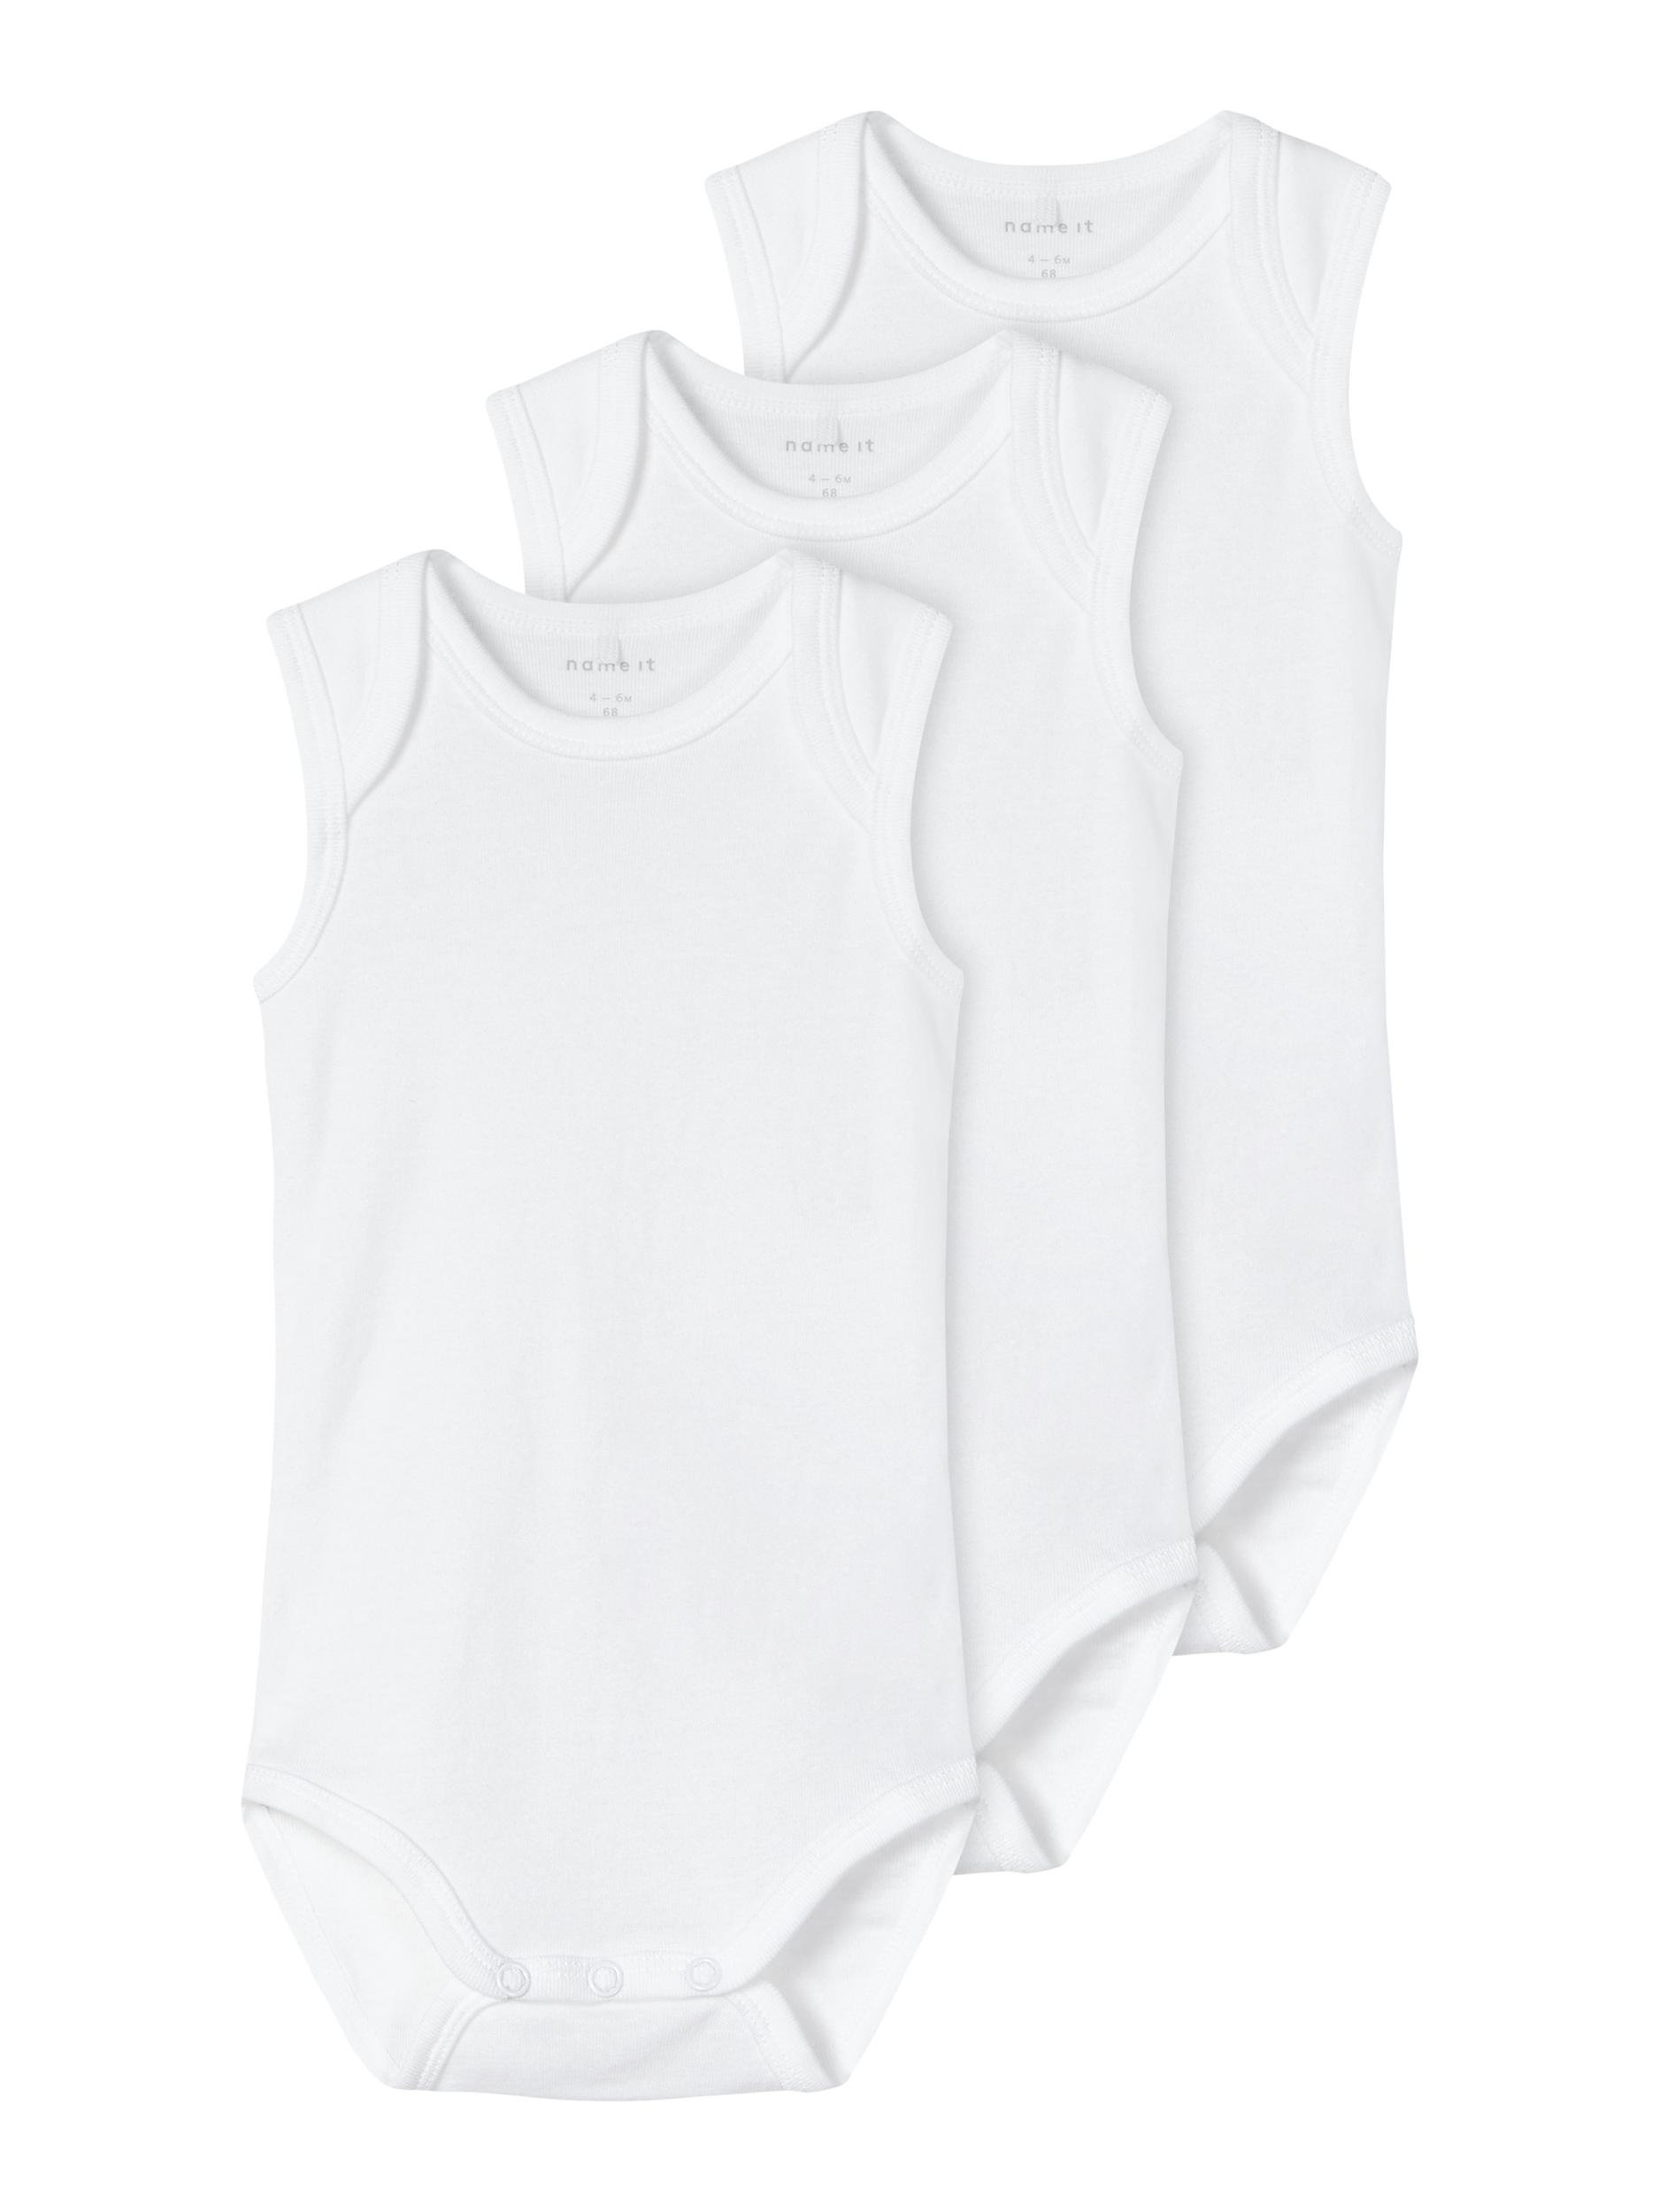 NAME IT NBNBODY WHITE Weiss SOLID 3 3P kaufen online NOOS TANK